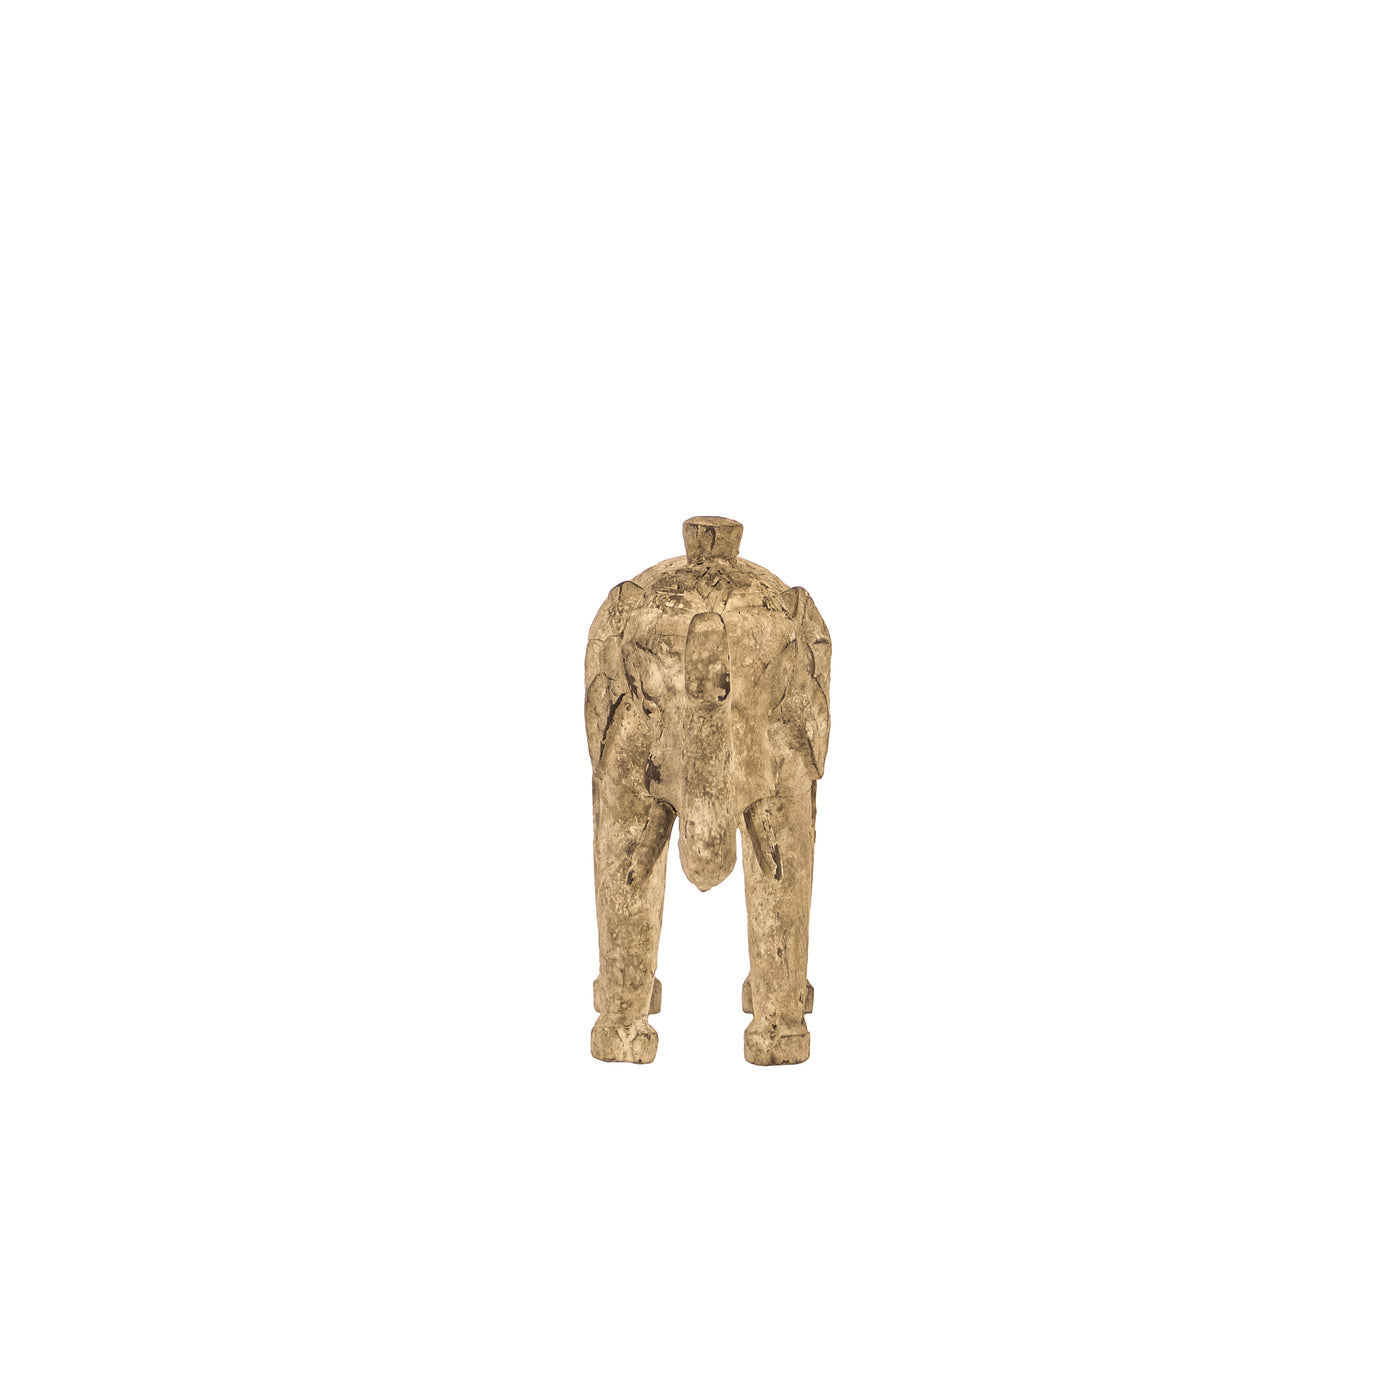 Small Hand Carved Elephant from Suar Wood